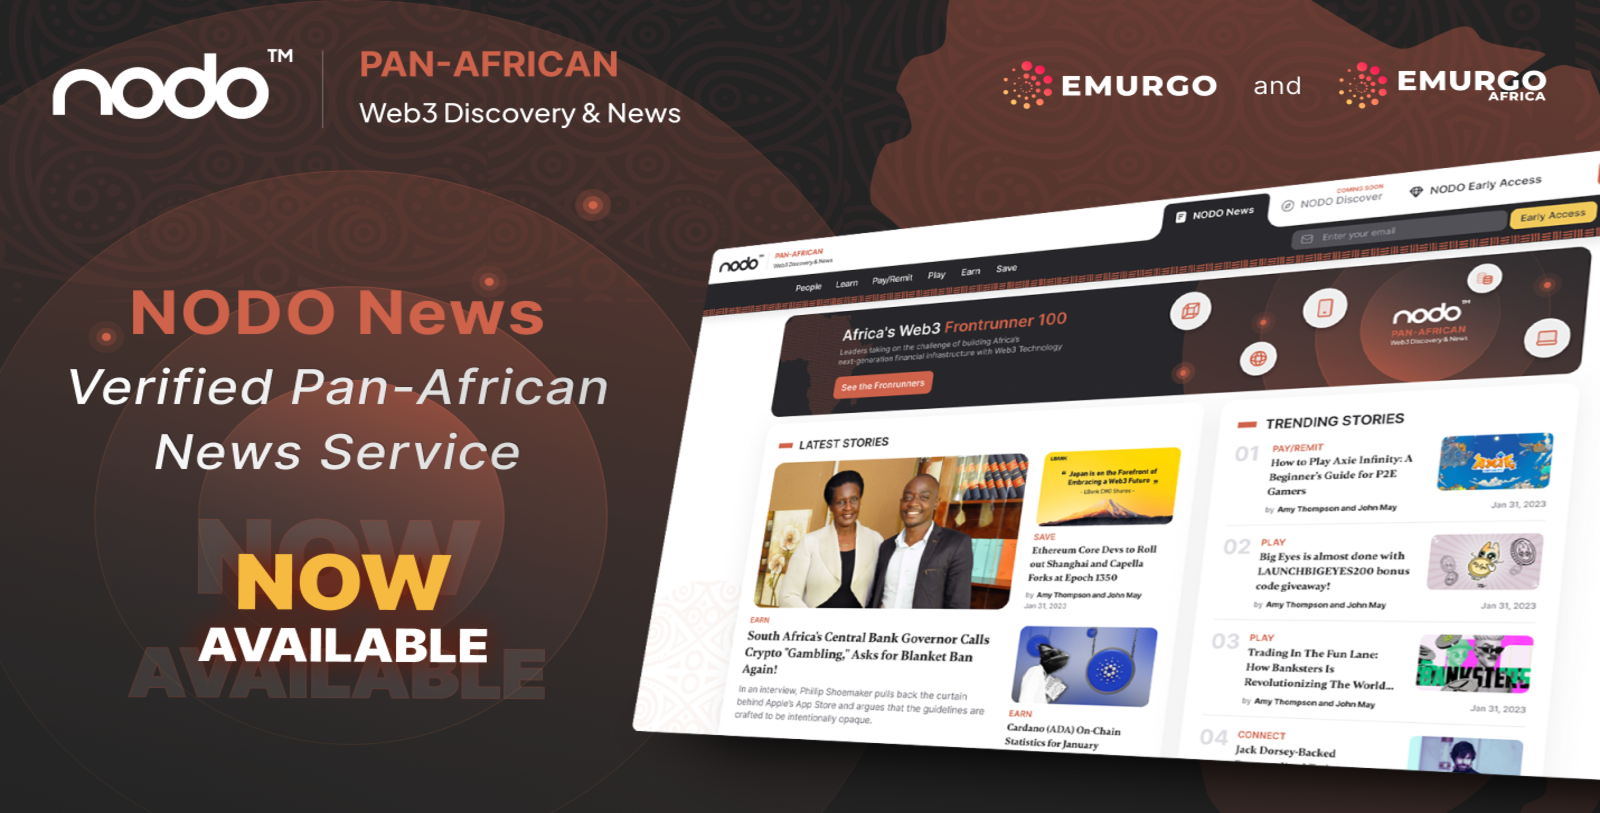 Pan-African Web3 News Service NODO News Available Now